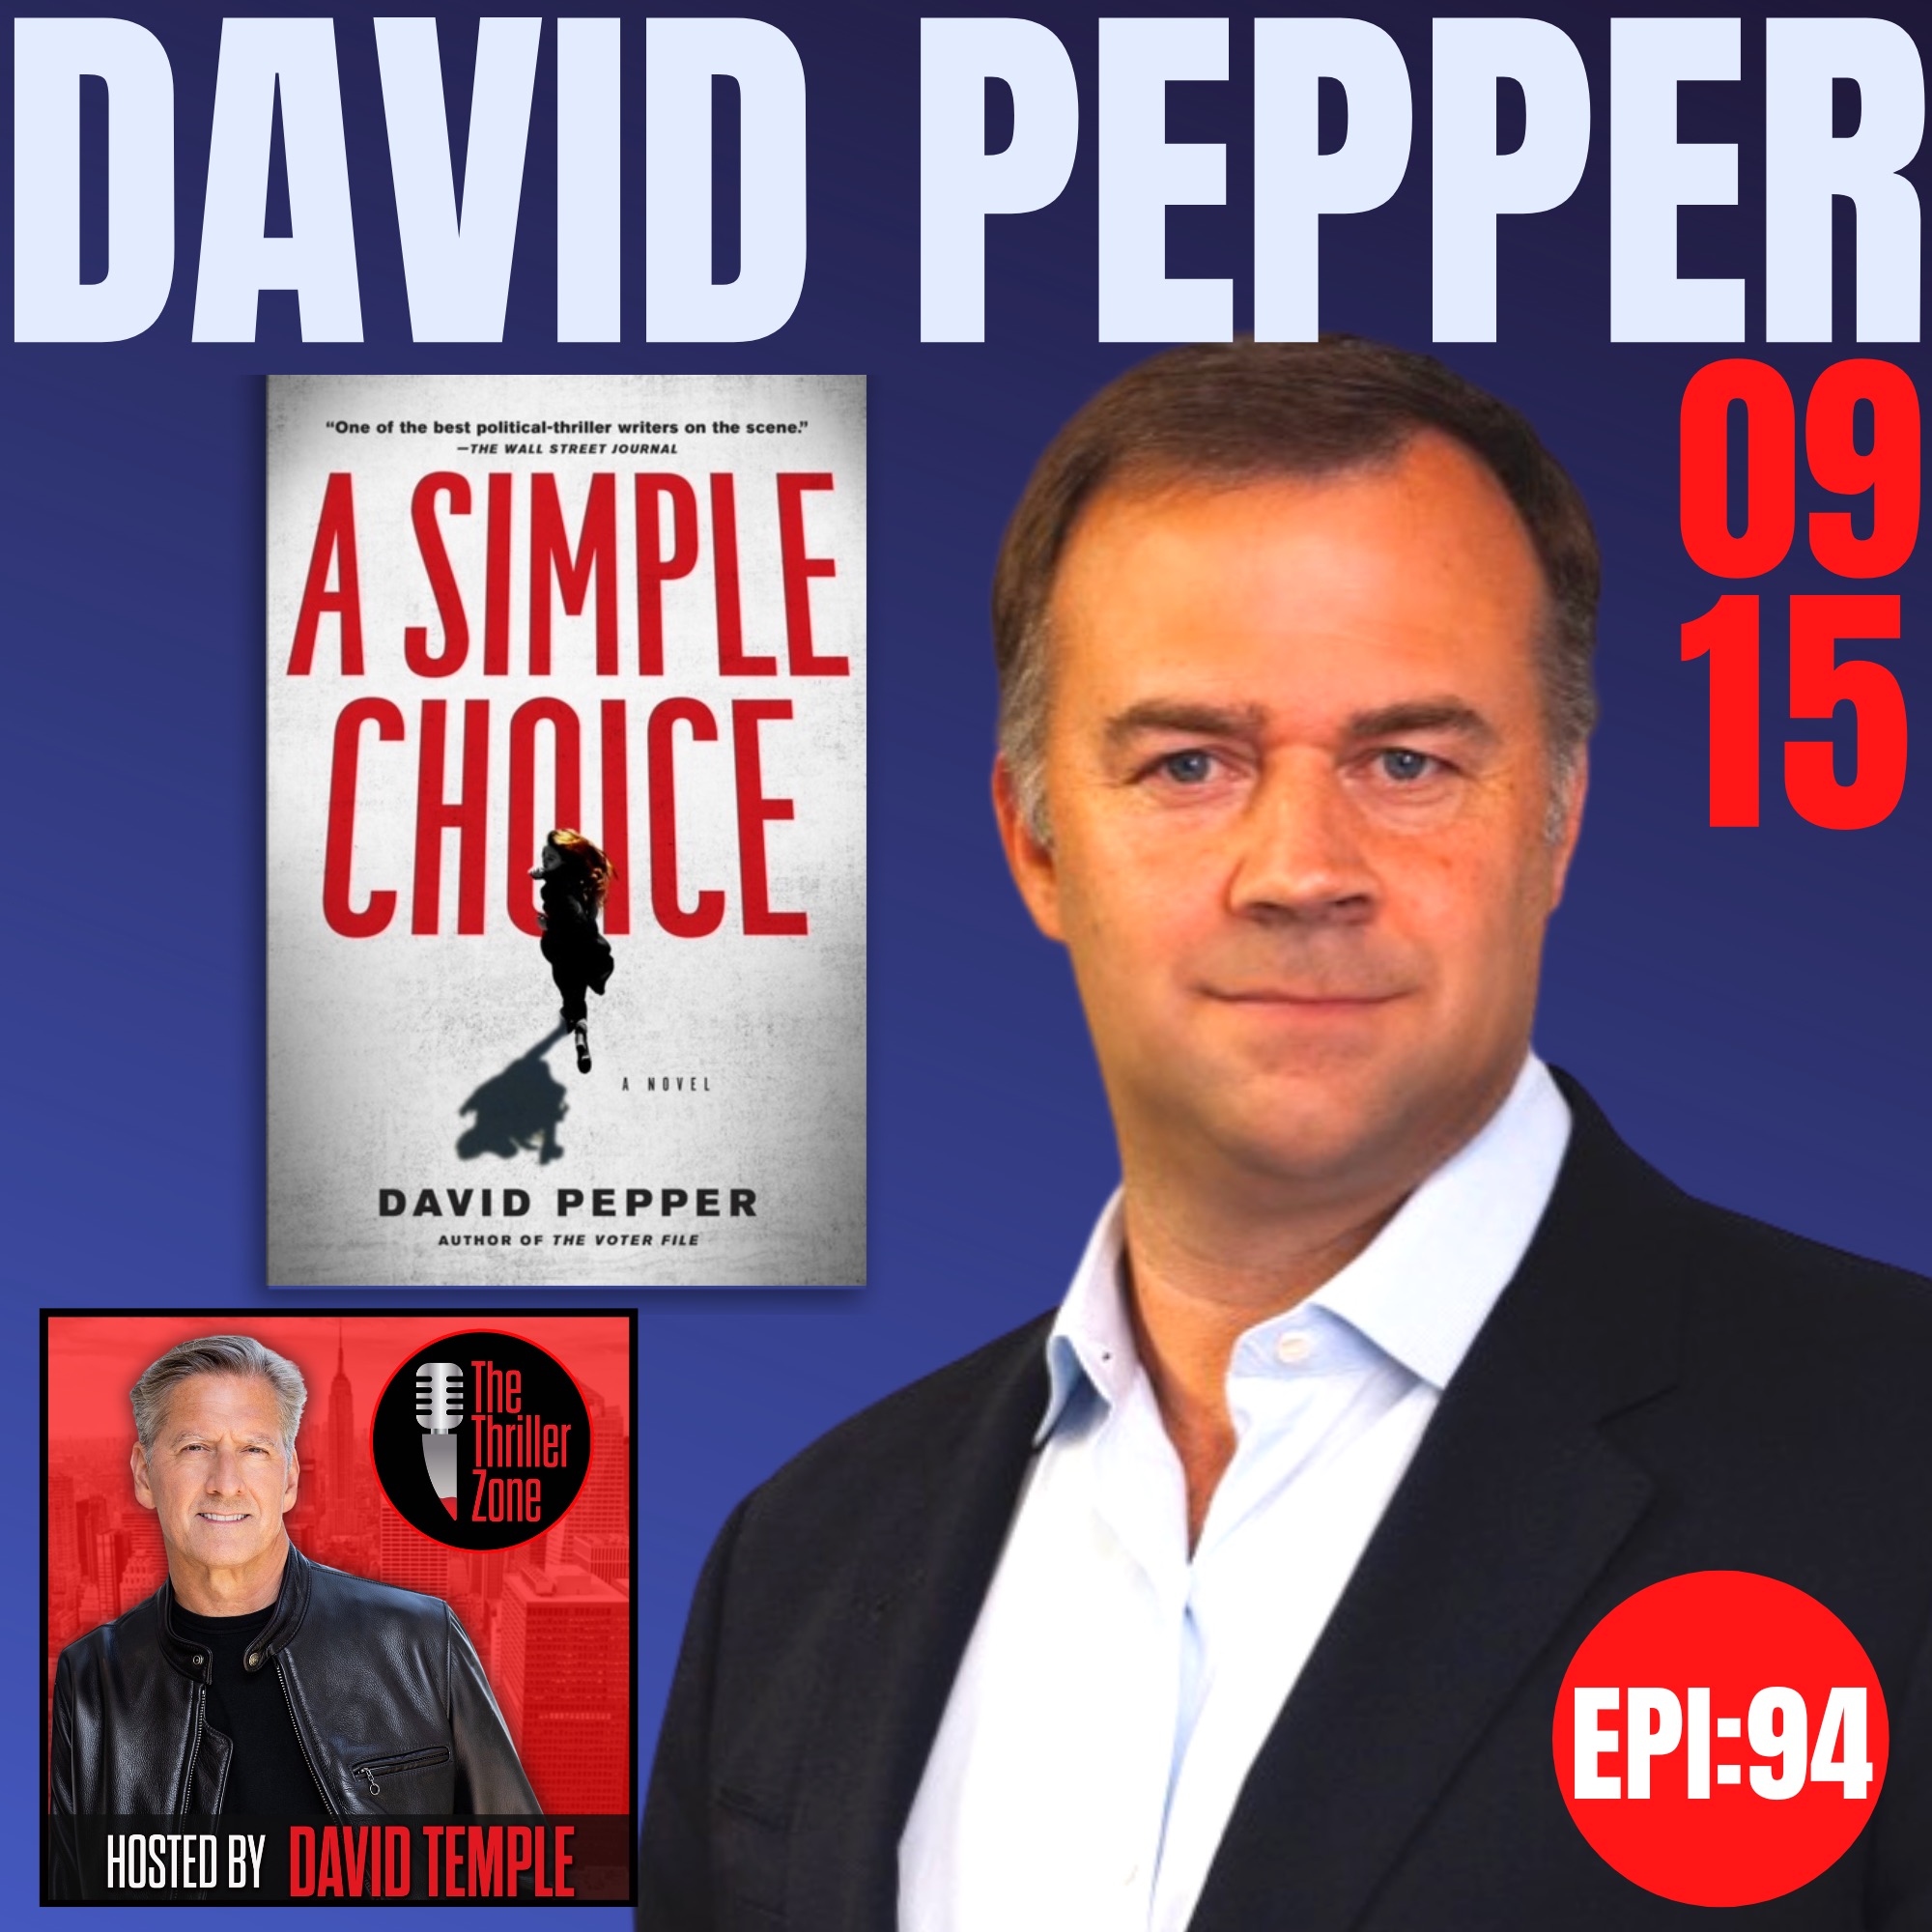 David Pepper, author of A Simple Choice Image